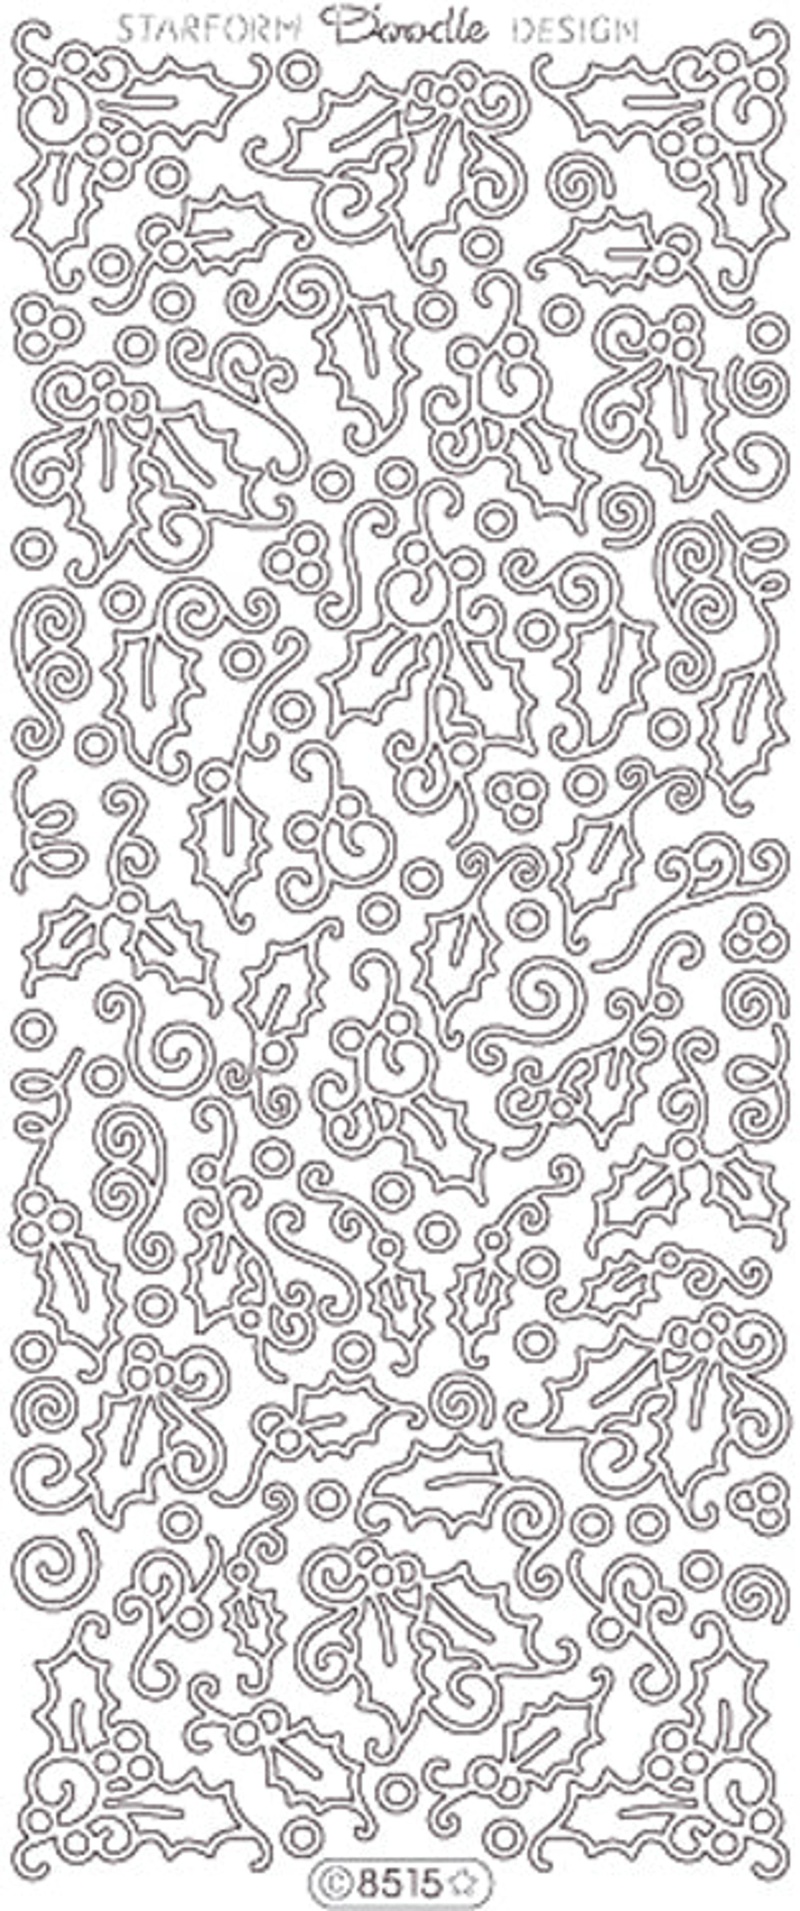 Deco Stickers -Swirls And Holly